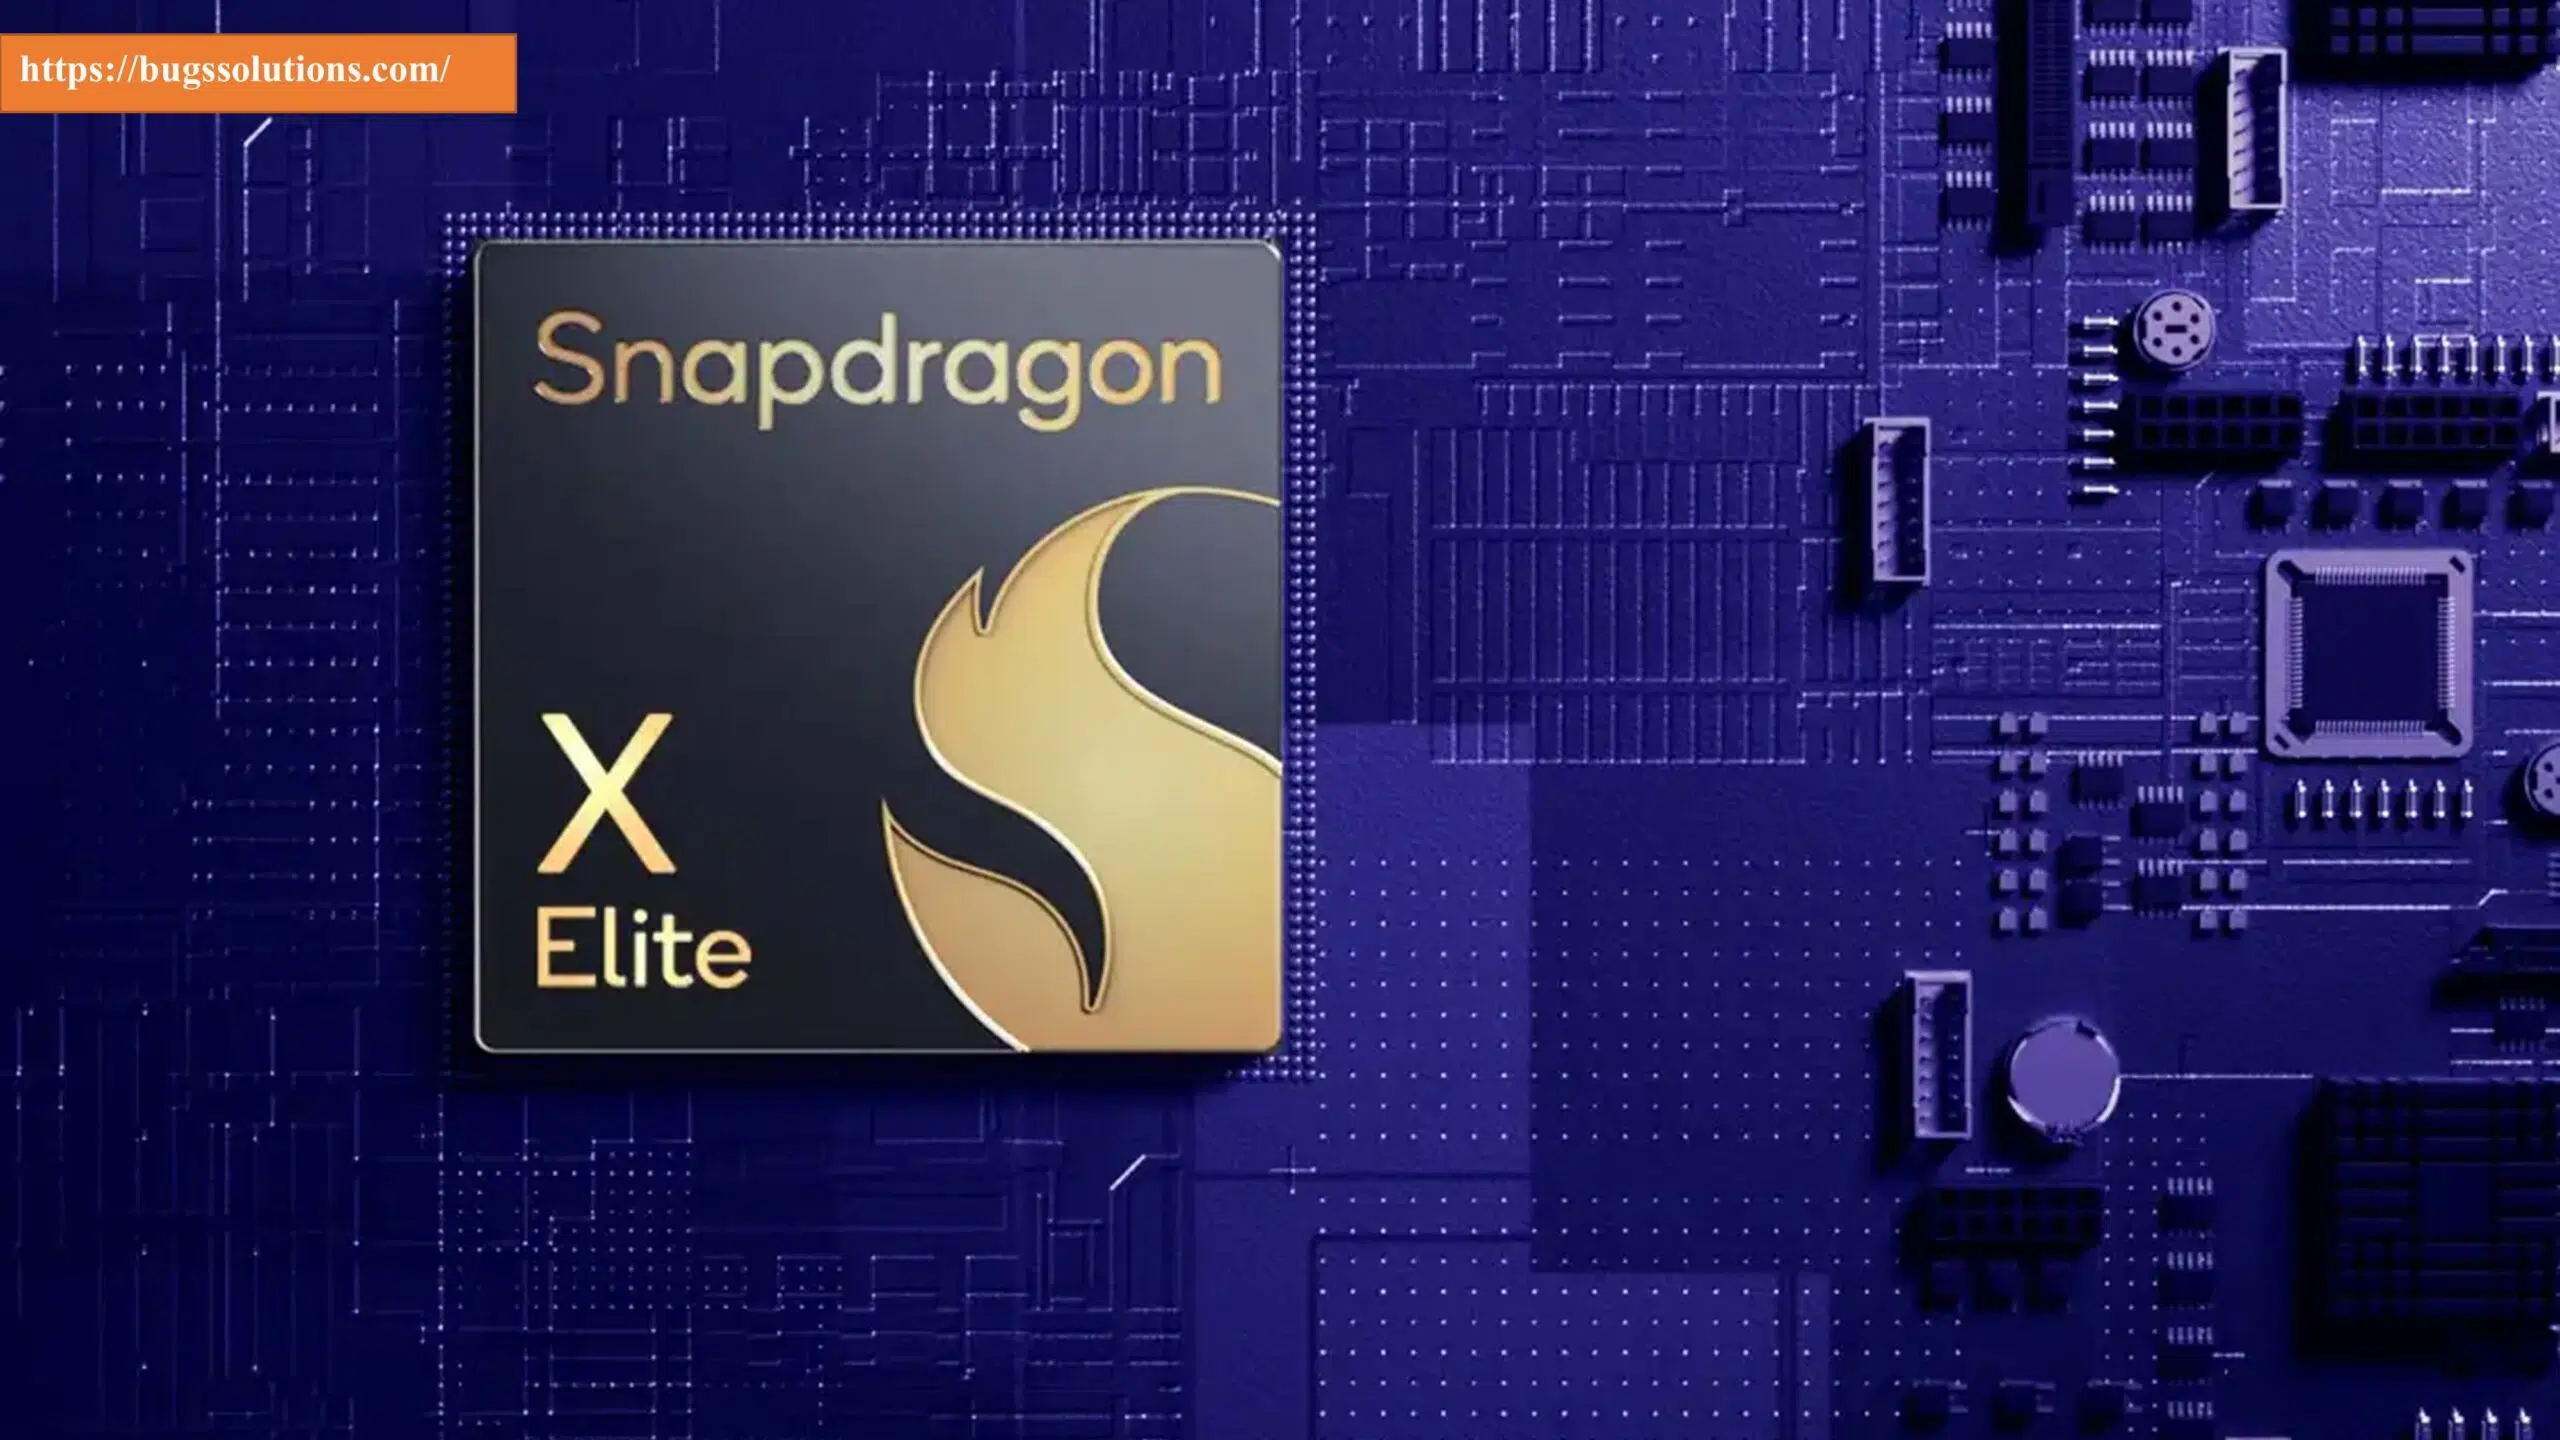 Snapdragon 8 Gen 3 Chipset: Unleashing Next-Level Performance and Efficiency - Bugs Solutions